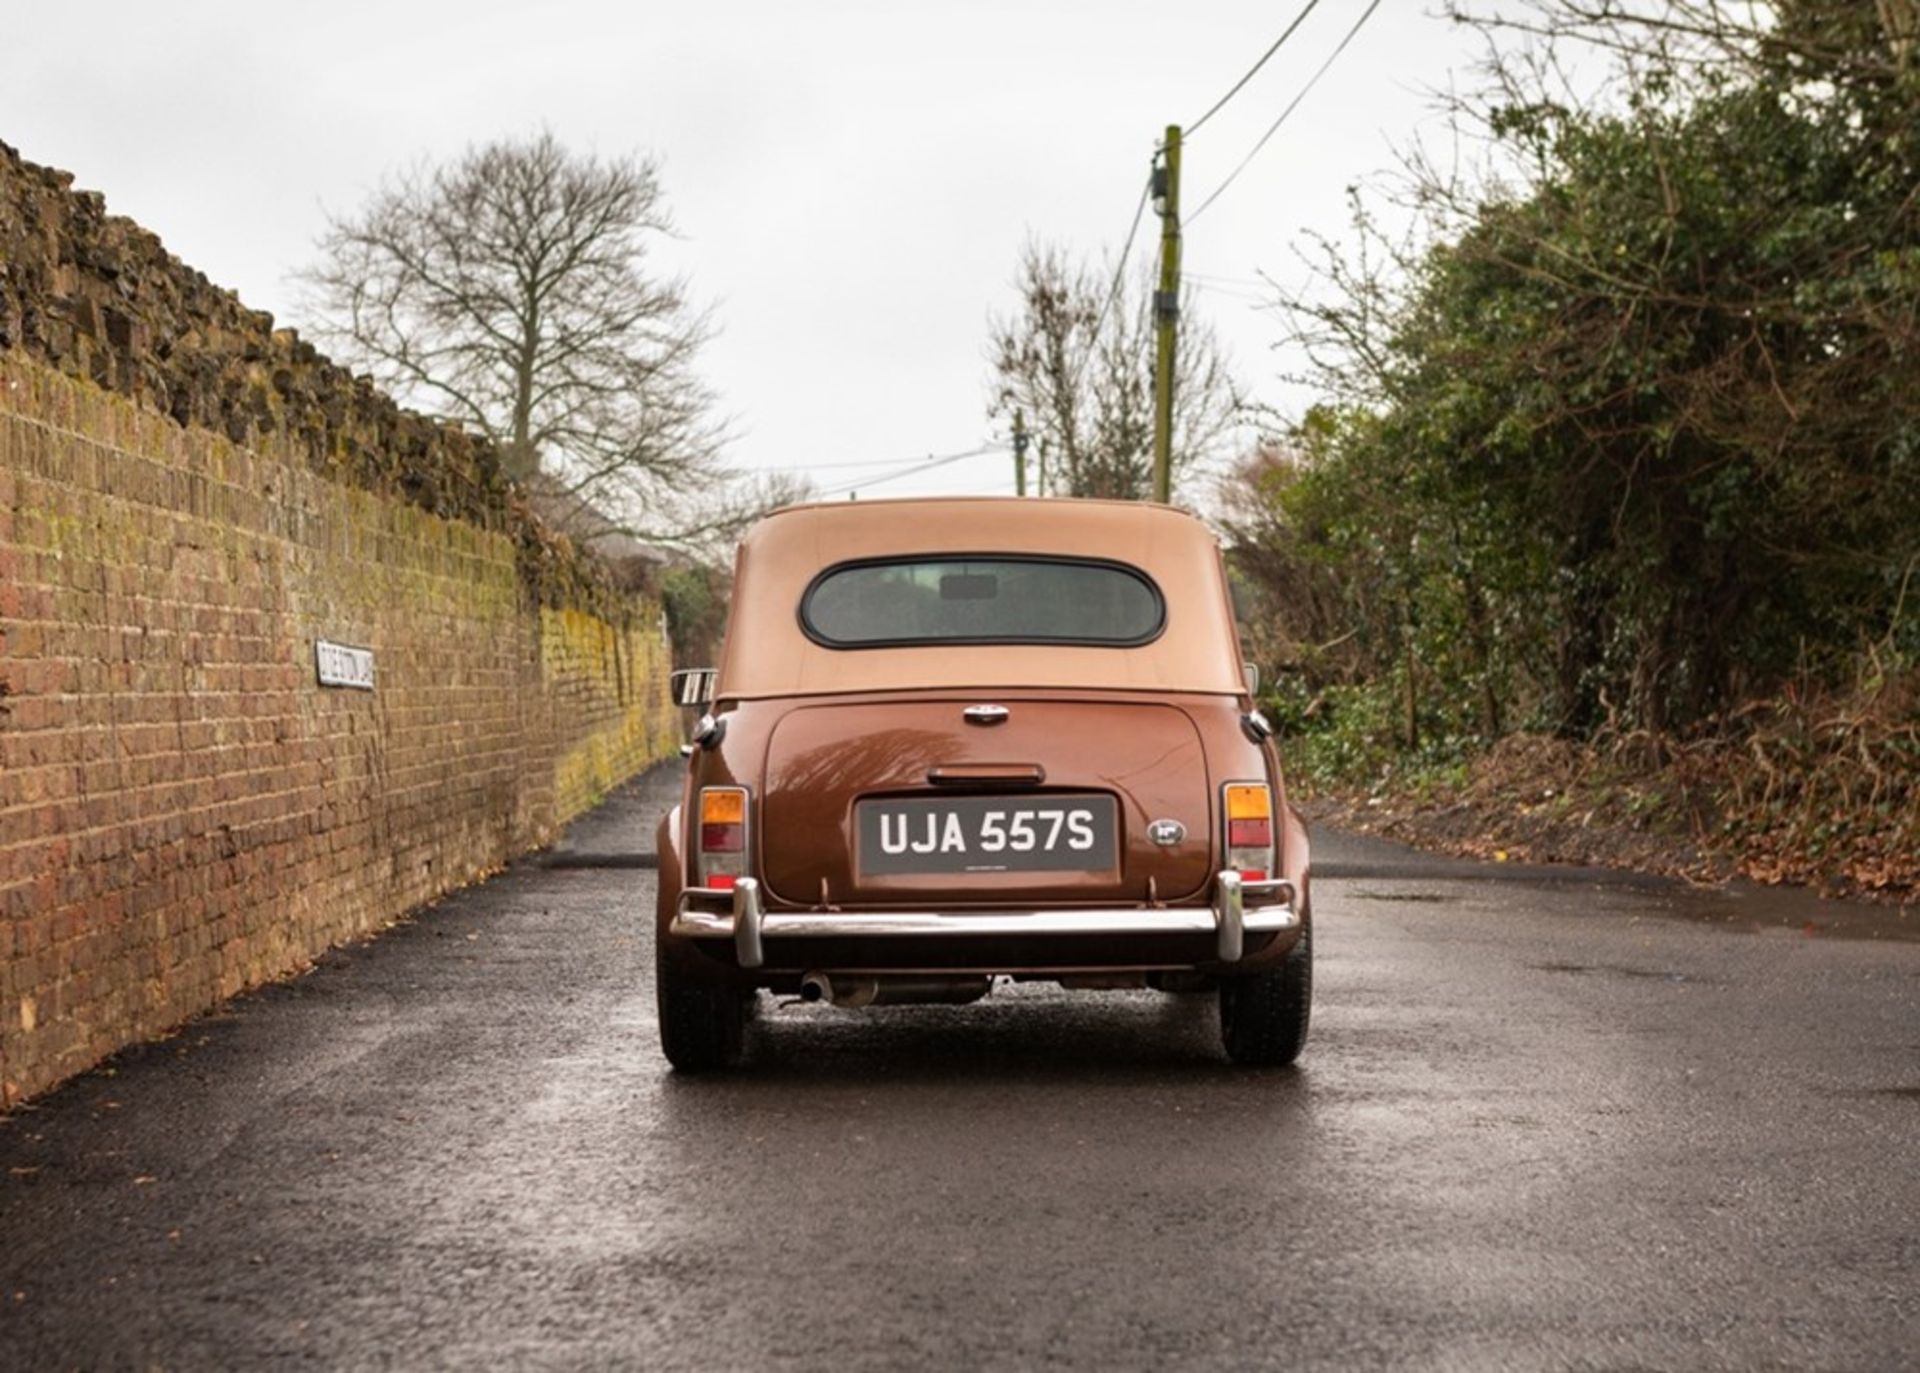 1976 Mini ‘Margrave’ by Wood & Pickett (1293cc) - Image 3 of 9